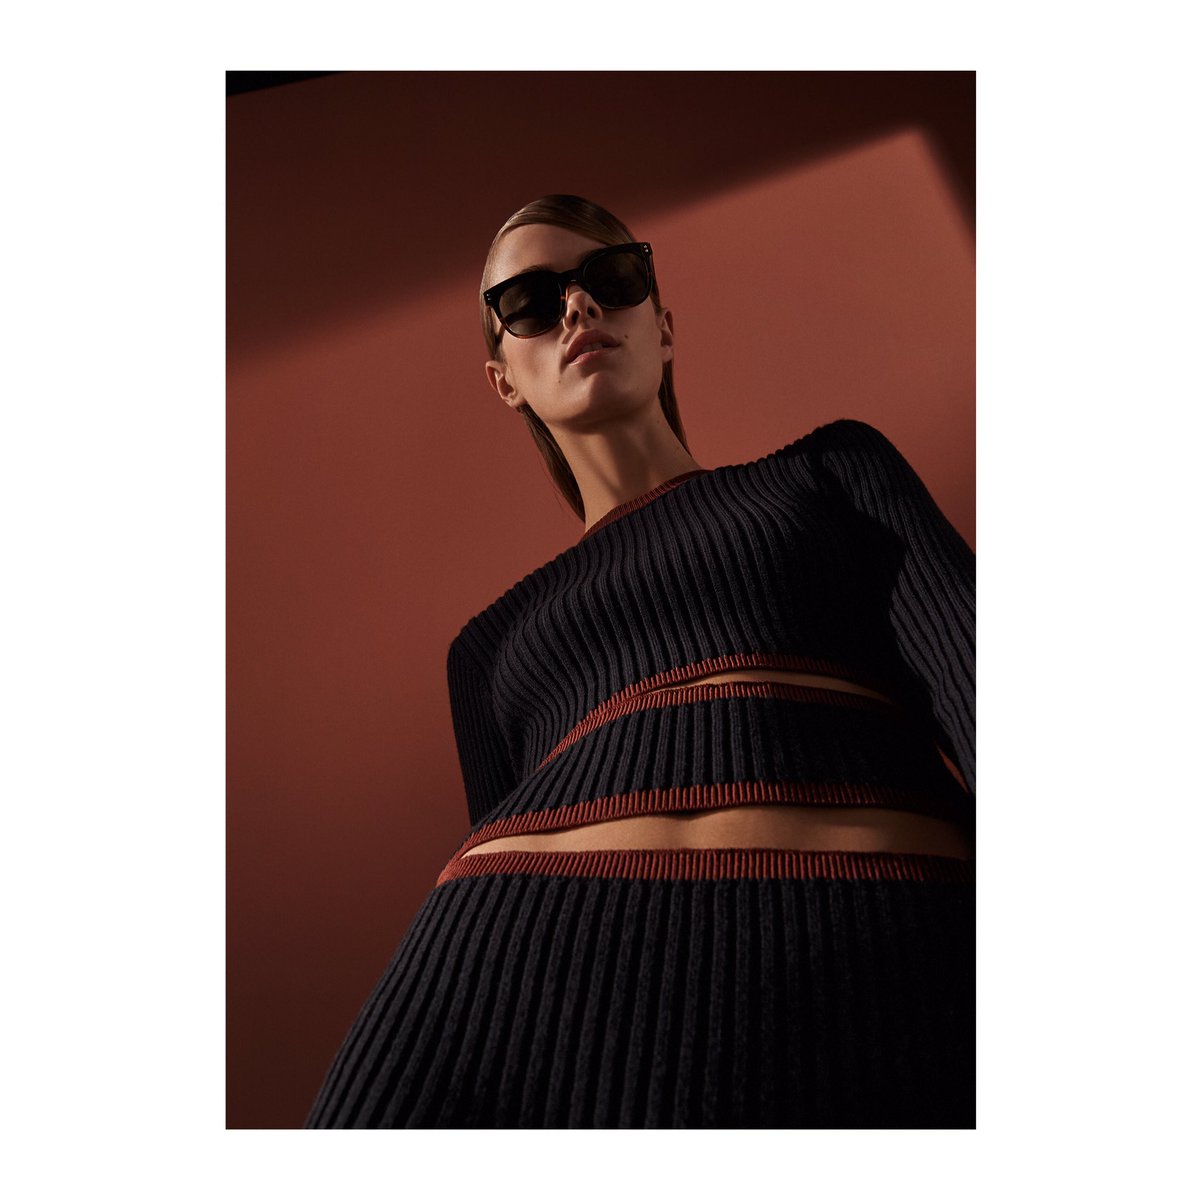 Summer is coming! #TheVB from my new eyewear collection… https://t.co/LSOlV6sx9j #VBDoverSt #VBHongKong x vb https://t.co/8ImQx3okfS